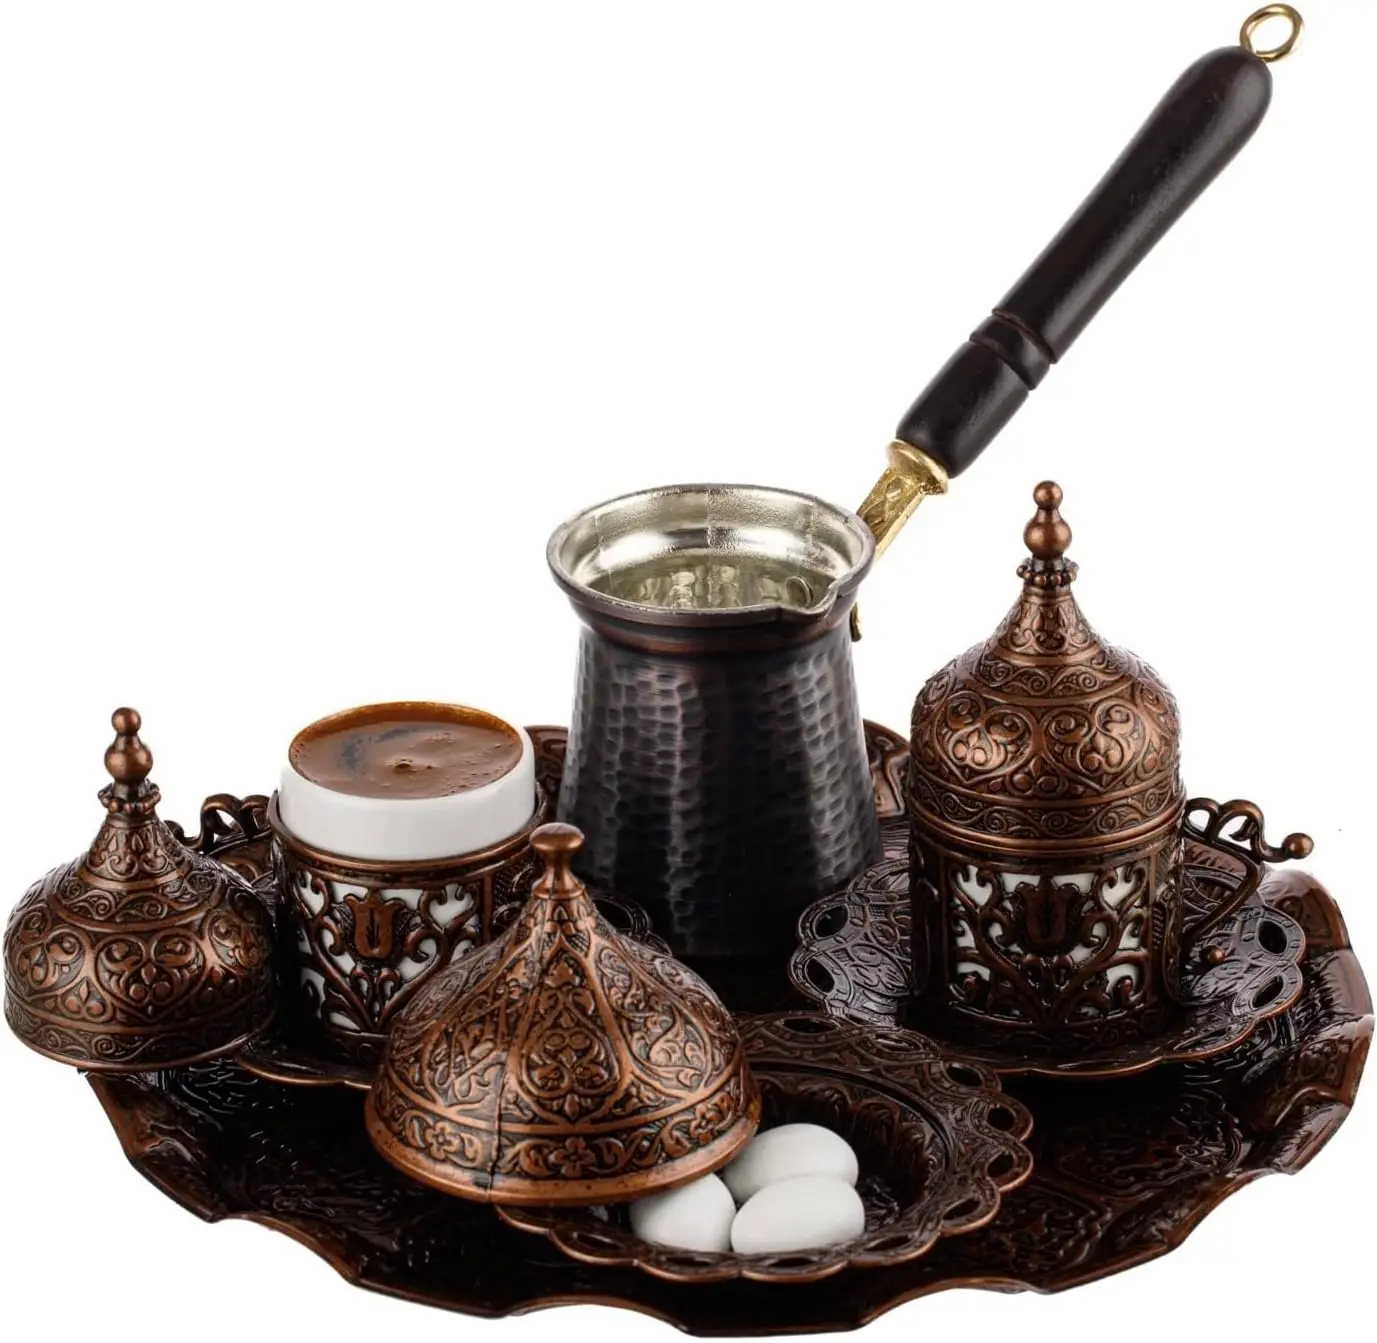 https://ae01.alicdn.com/kf/S6dcf0c01ddc049b586bdf0182c560f3fL/Turkish-Greek-Arabic-Coffee-Full-Set-with-Cups-Saucers-Lids-Sugar-Bowl-Tray-and-Copper-Coffee.jpg